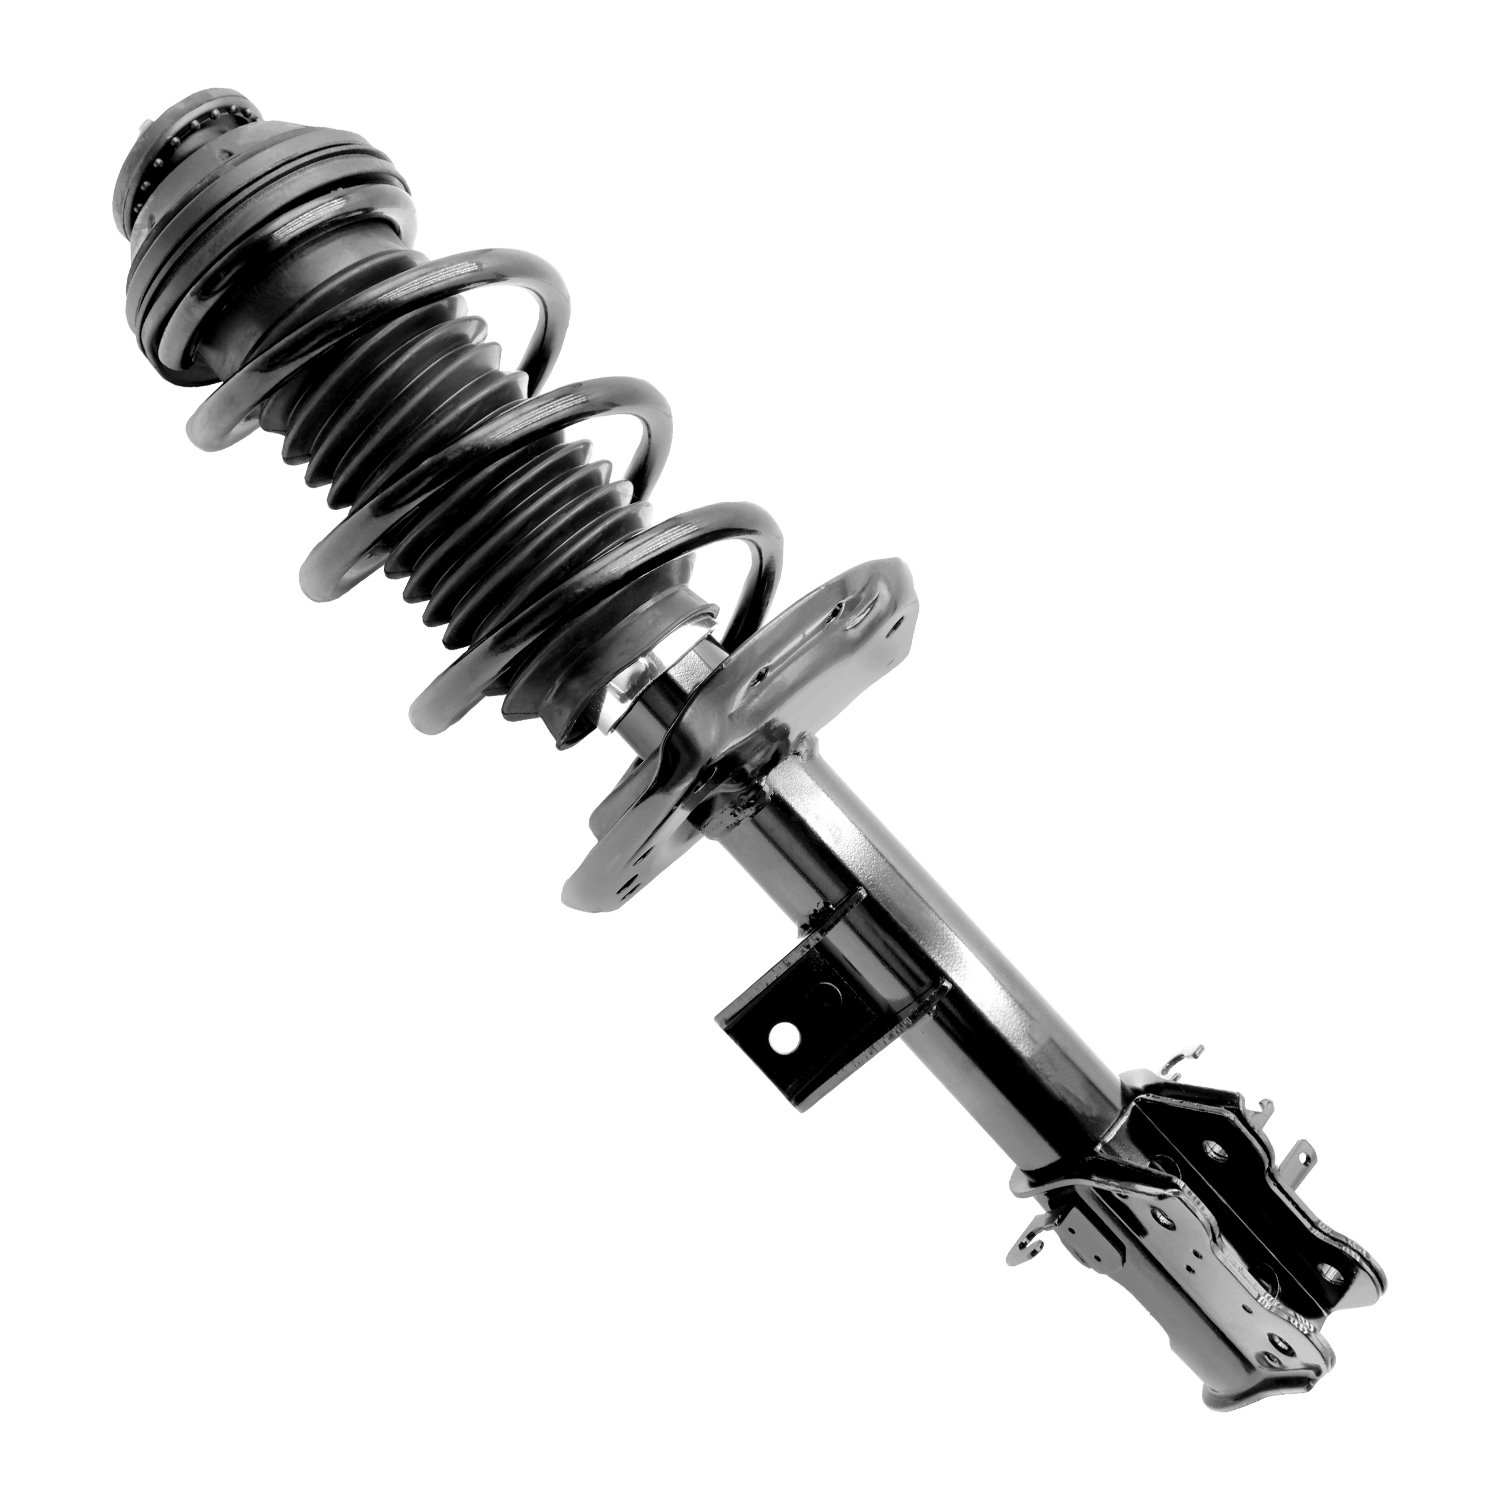 13551 Front Suspension Strut & Coil Spring Assemby Fits Select Fiat 500